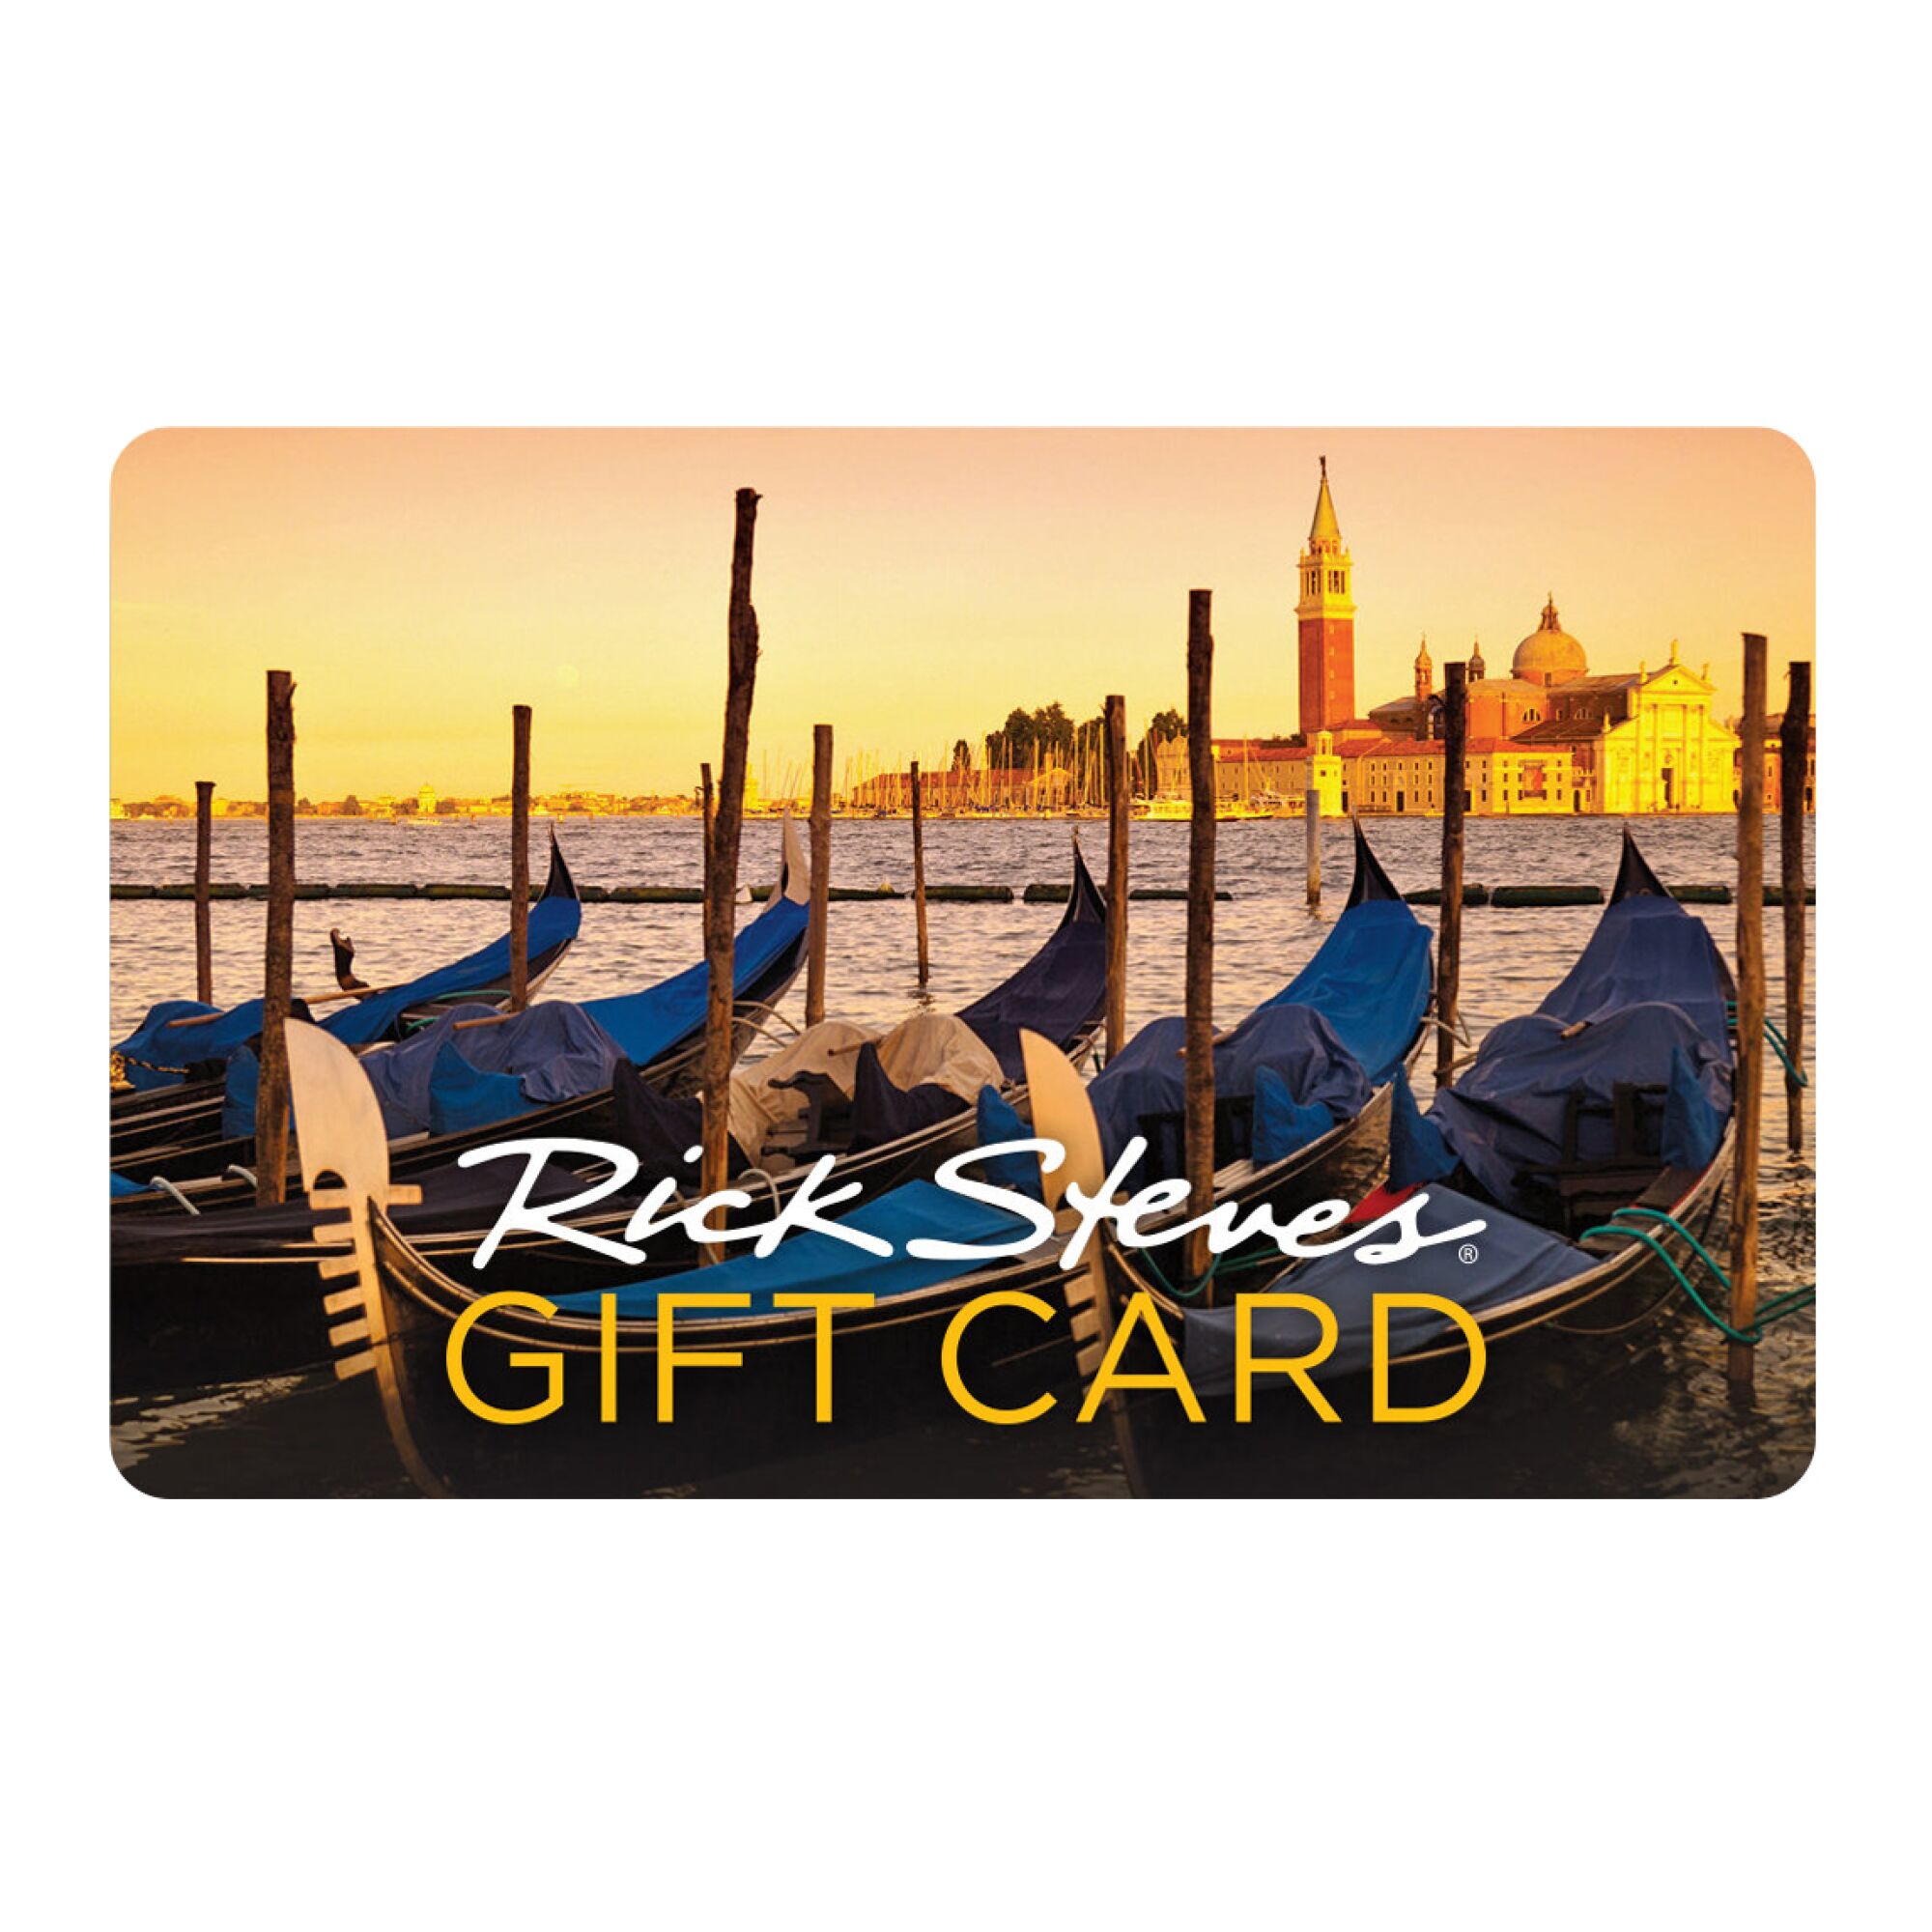 A gift card to the Europe of Rick Steves